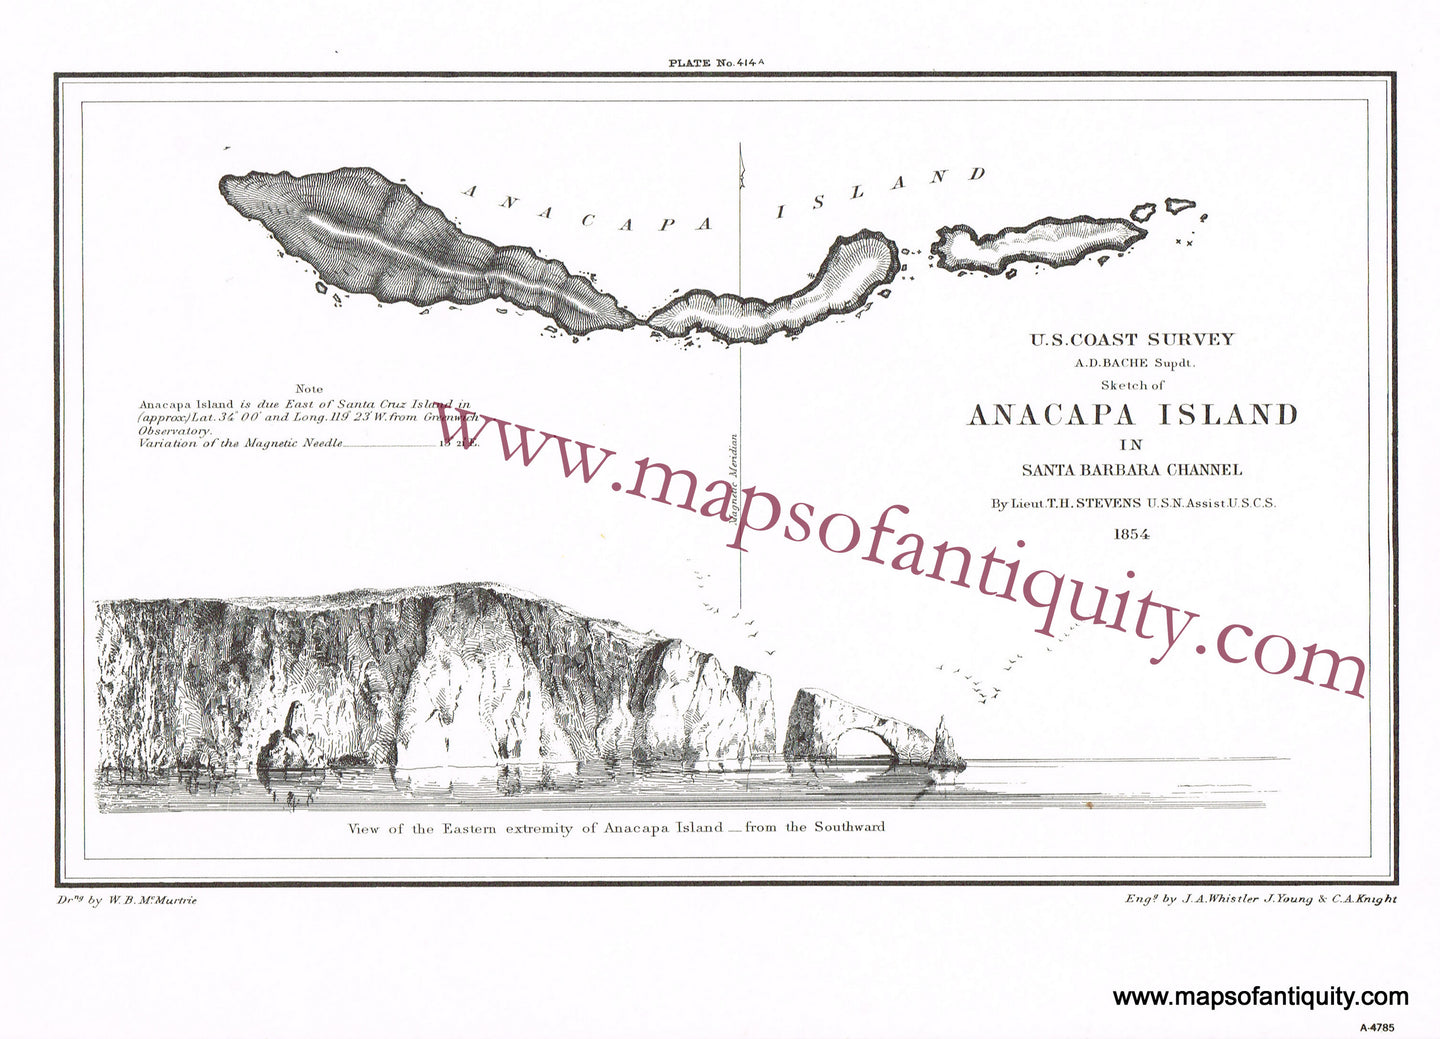 Reproduction-Sketch-of-Anacapa-Island-in-Santa-Barbara-Channel---Reproduction-Reproductions---Reproduction-Maps-Of-Antiquity